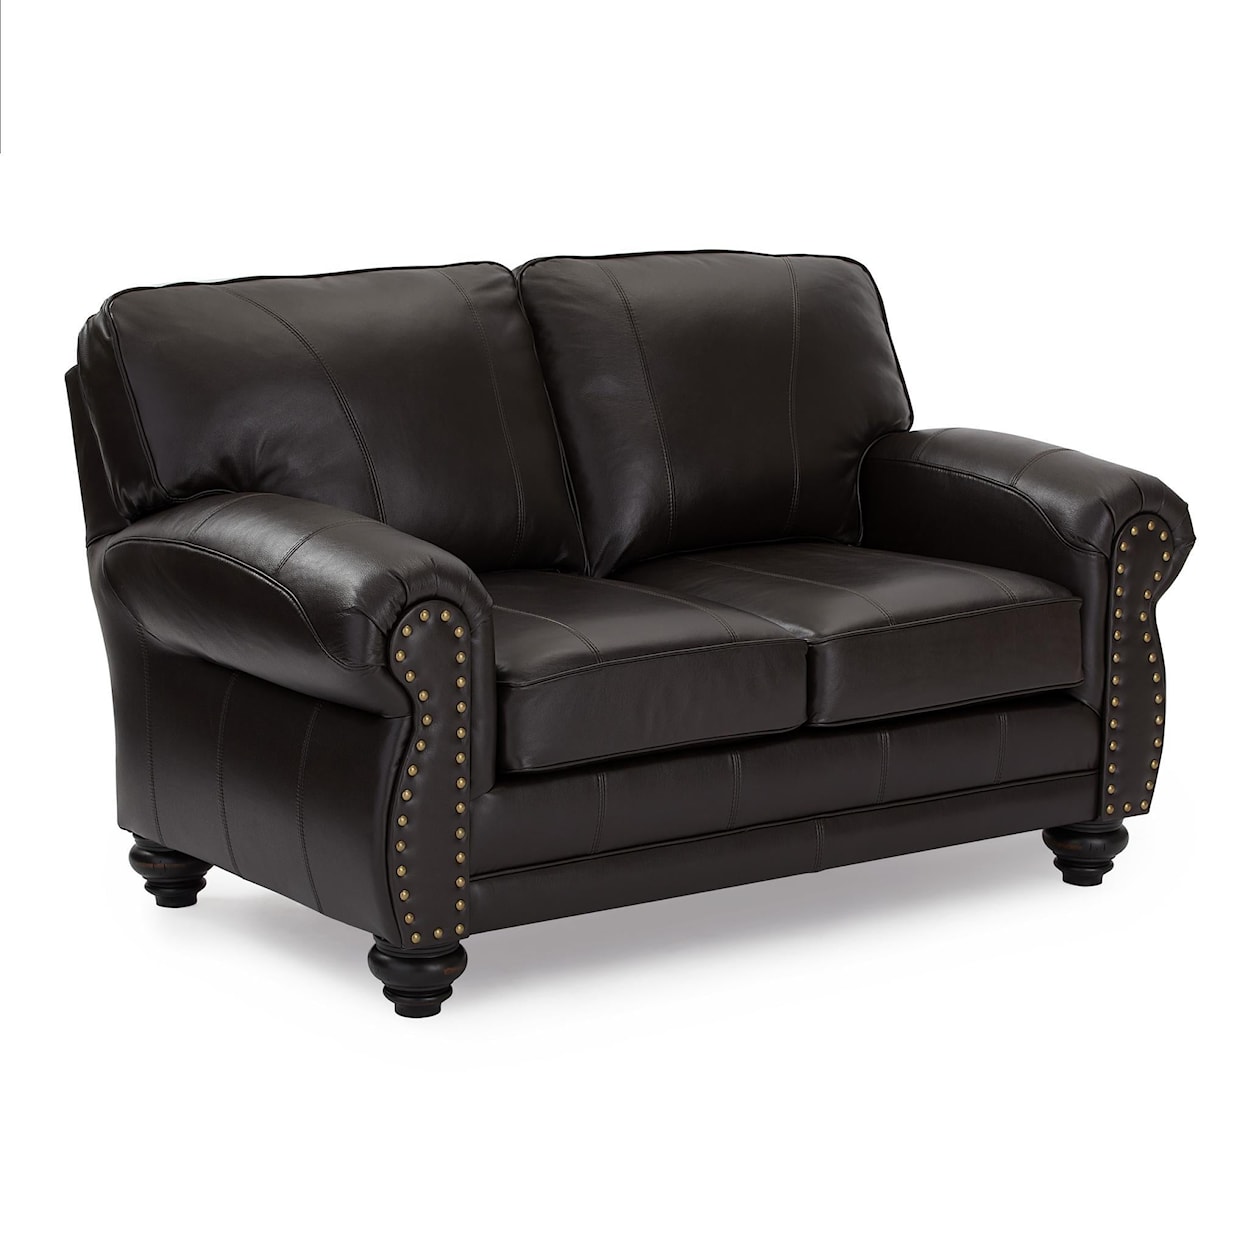 Best Home Furnishings Noble Leather Loveseat with Nailhead Trim